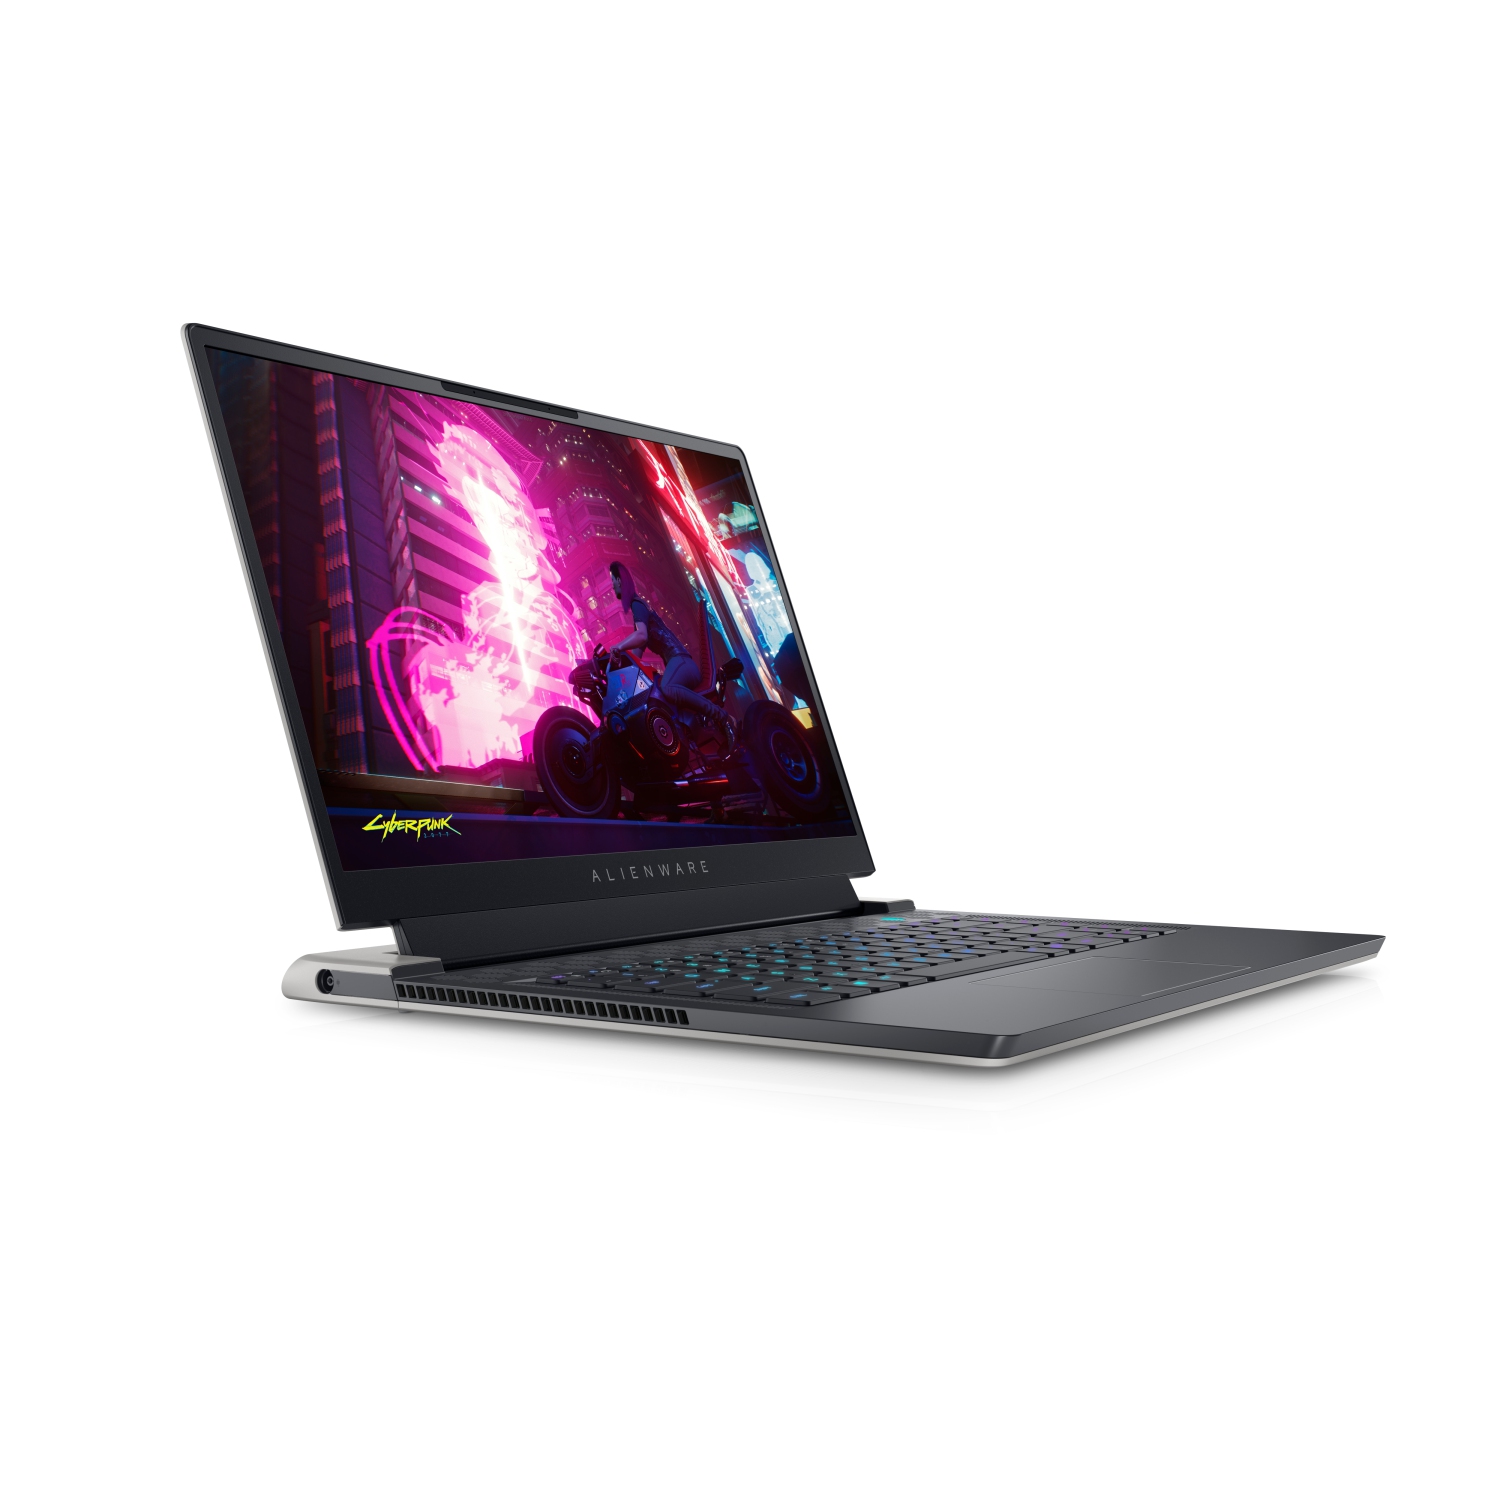 Refurbished (Excellent) - Dell Alienware X15 R1 Gaming Laptop (2021), 15.6" FHD, Core i7, 256GB SSD, 16GB RAM, RTX 3060, 8 Cores @ 4.6 GHz, 11th Gen CPU Certified